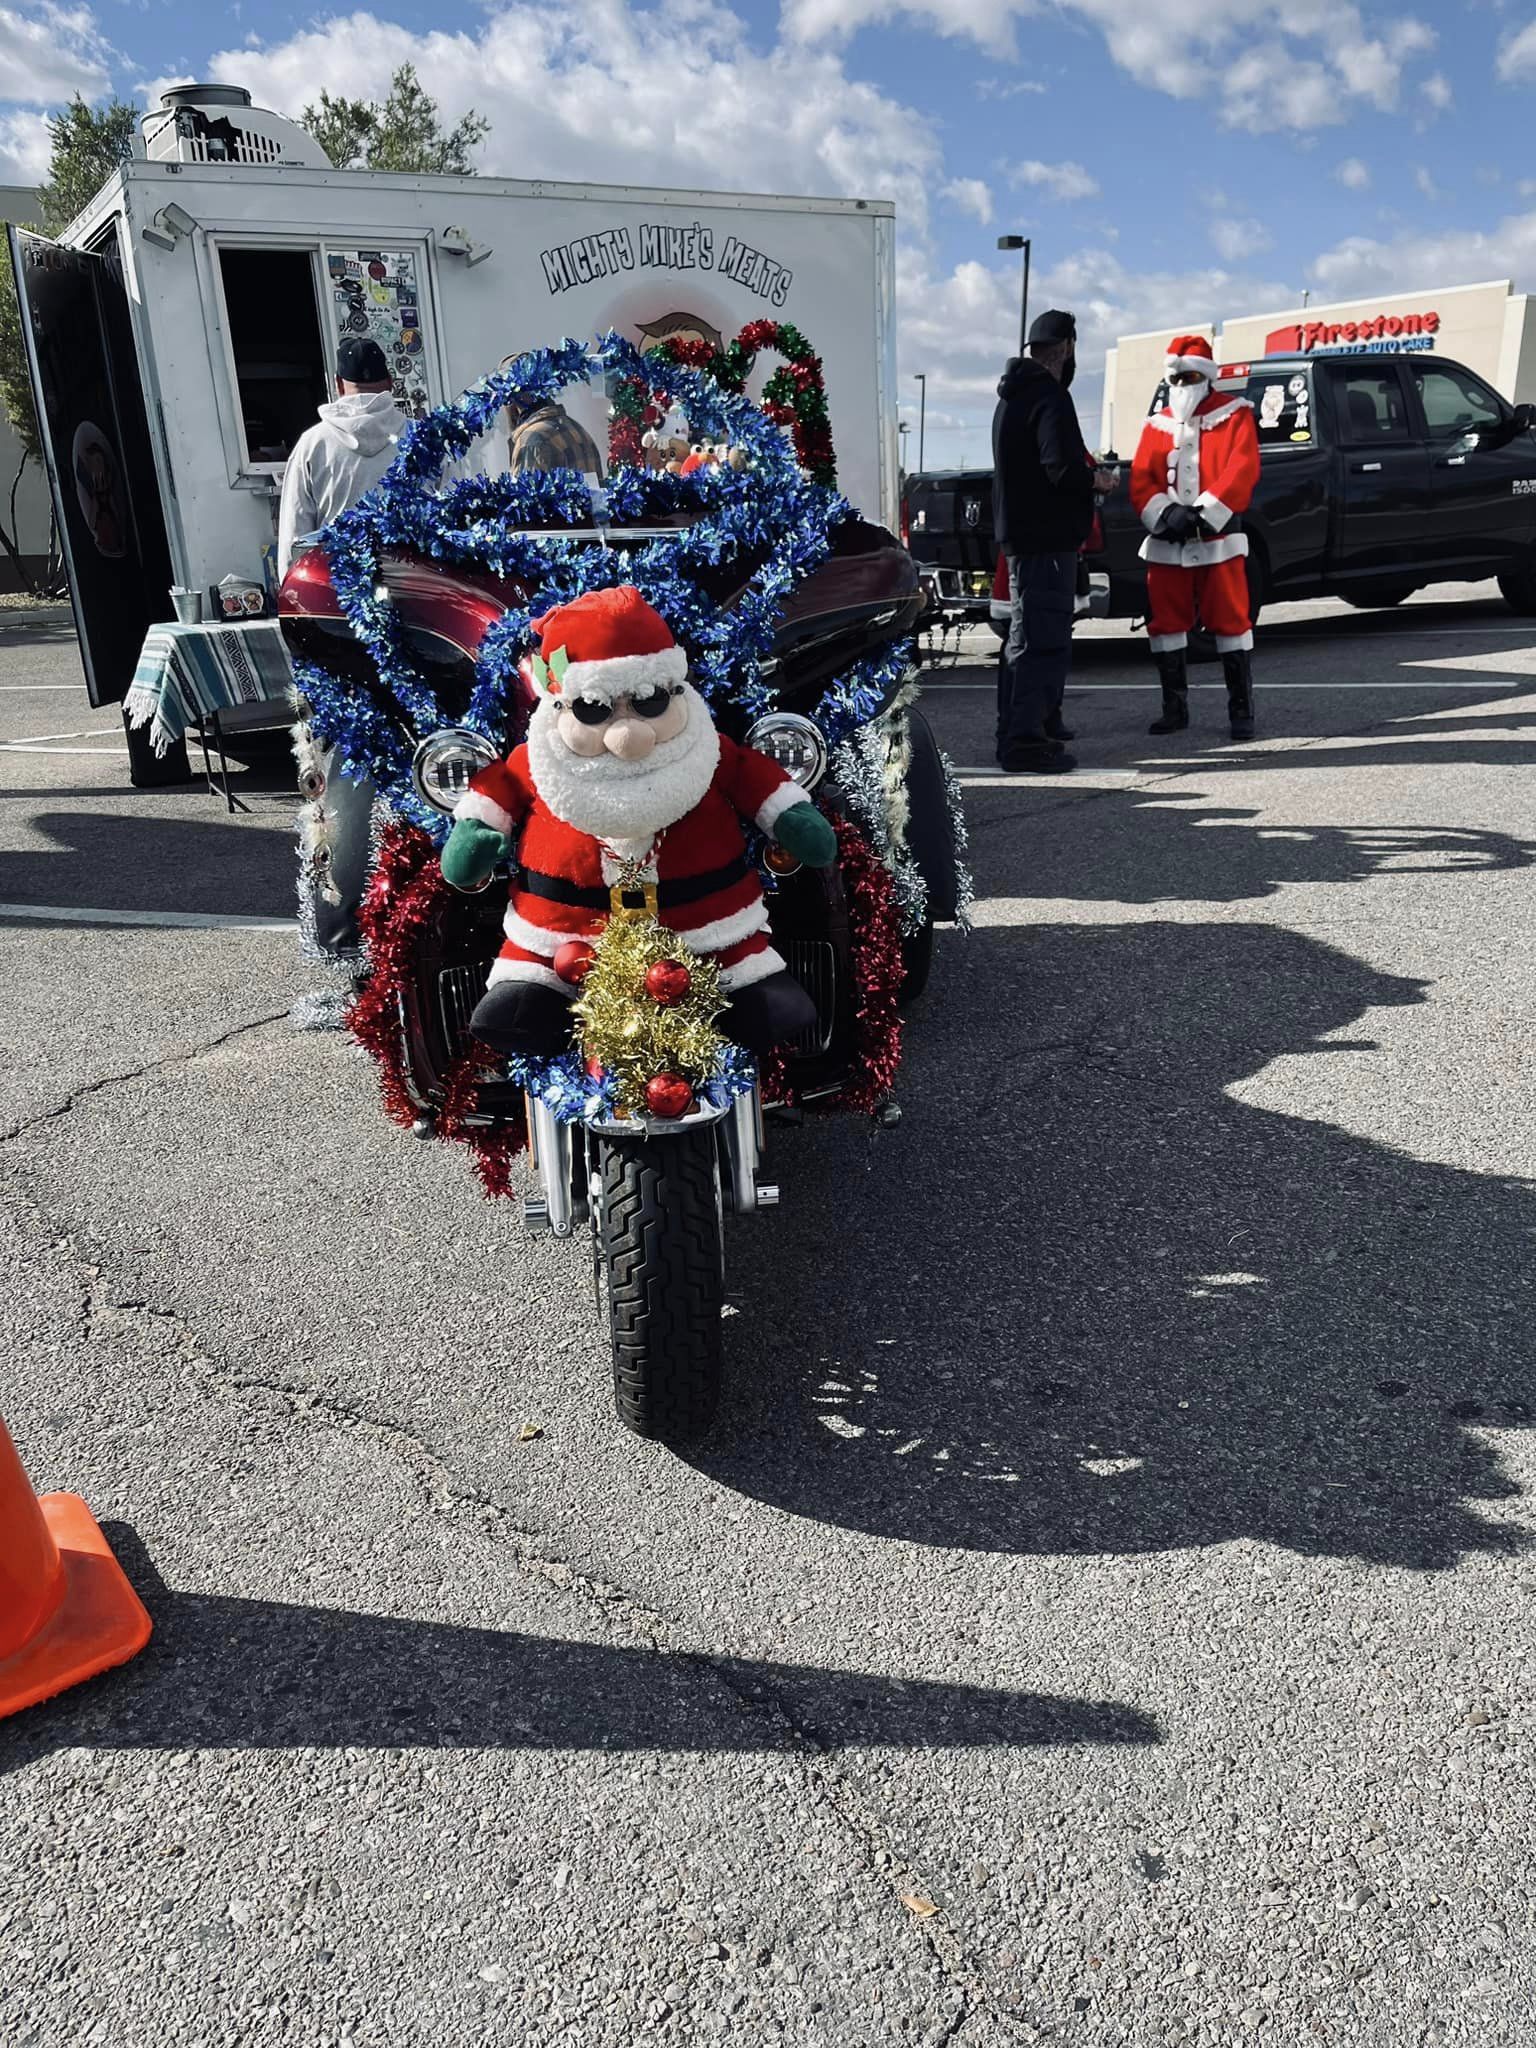 Join Santa at the 19th Annual Toys for Tots Run in Albuquerque, NM Oct. 22.